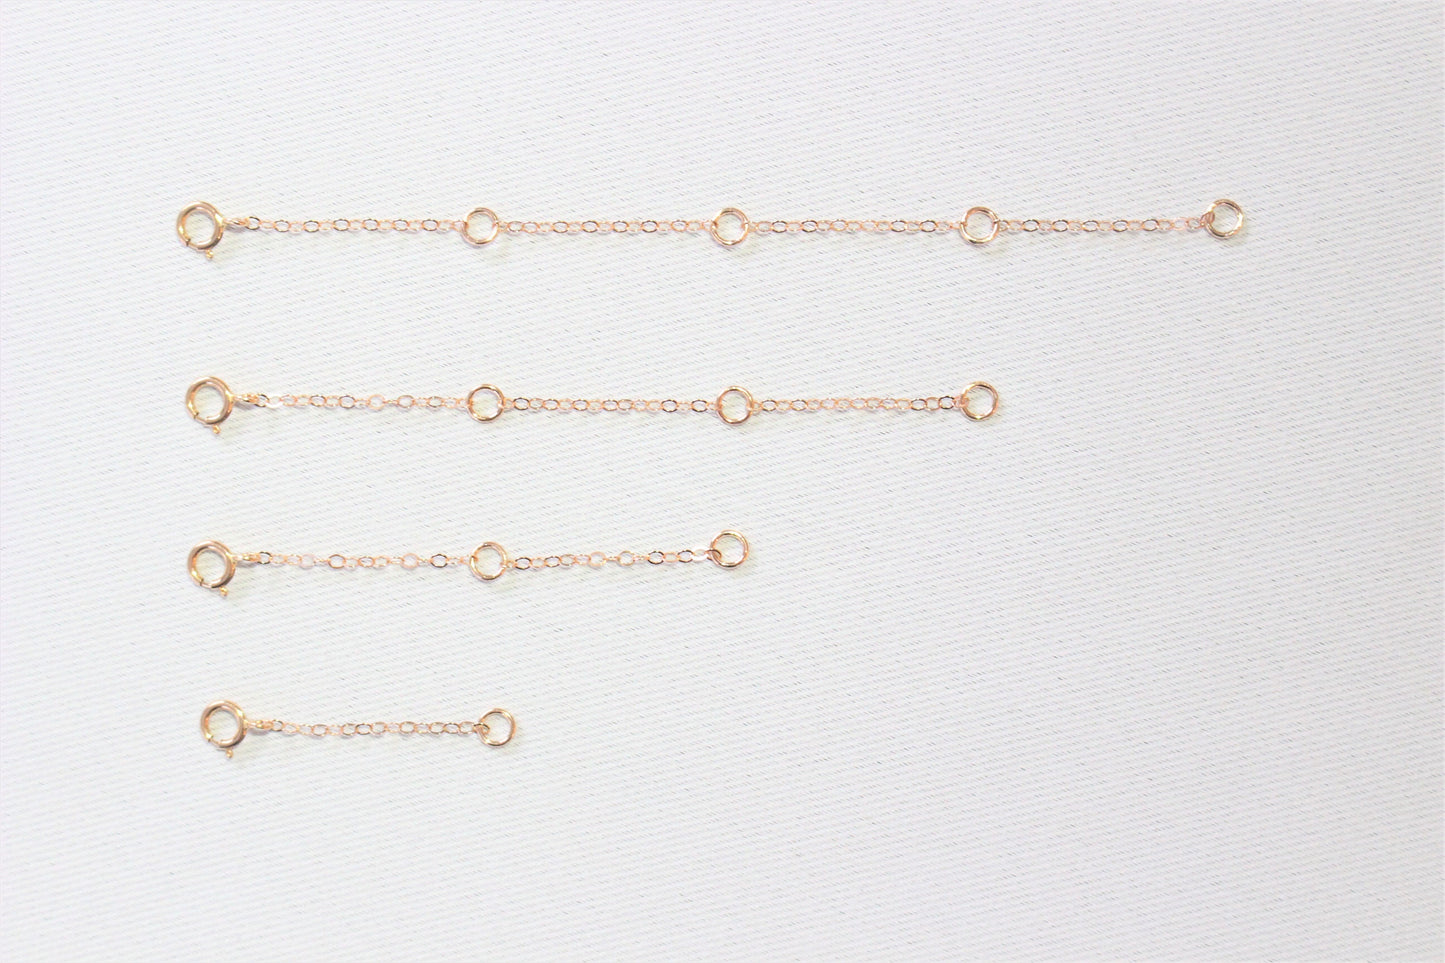 14K ROSE GOLD FILLED ∙ 1 2 3 4 inches ∙ Extension Chain ∙ Add to your necklace or bracelet ∙ Spring Clasp ∙ Necklace extender chain